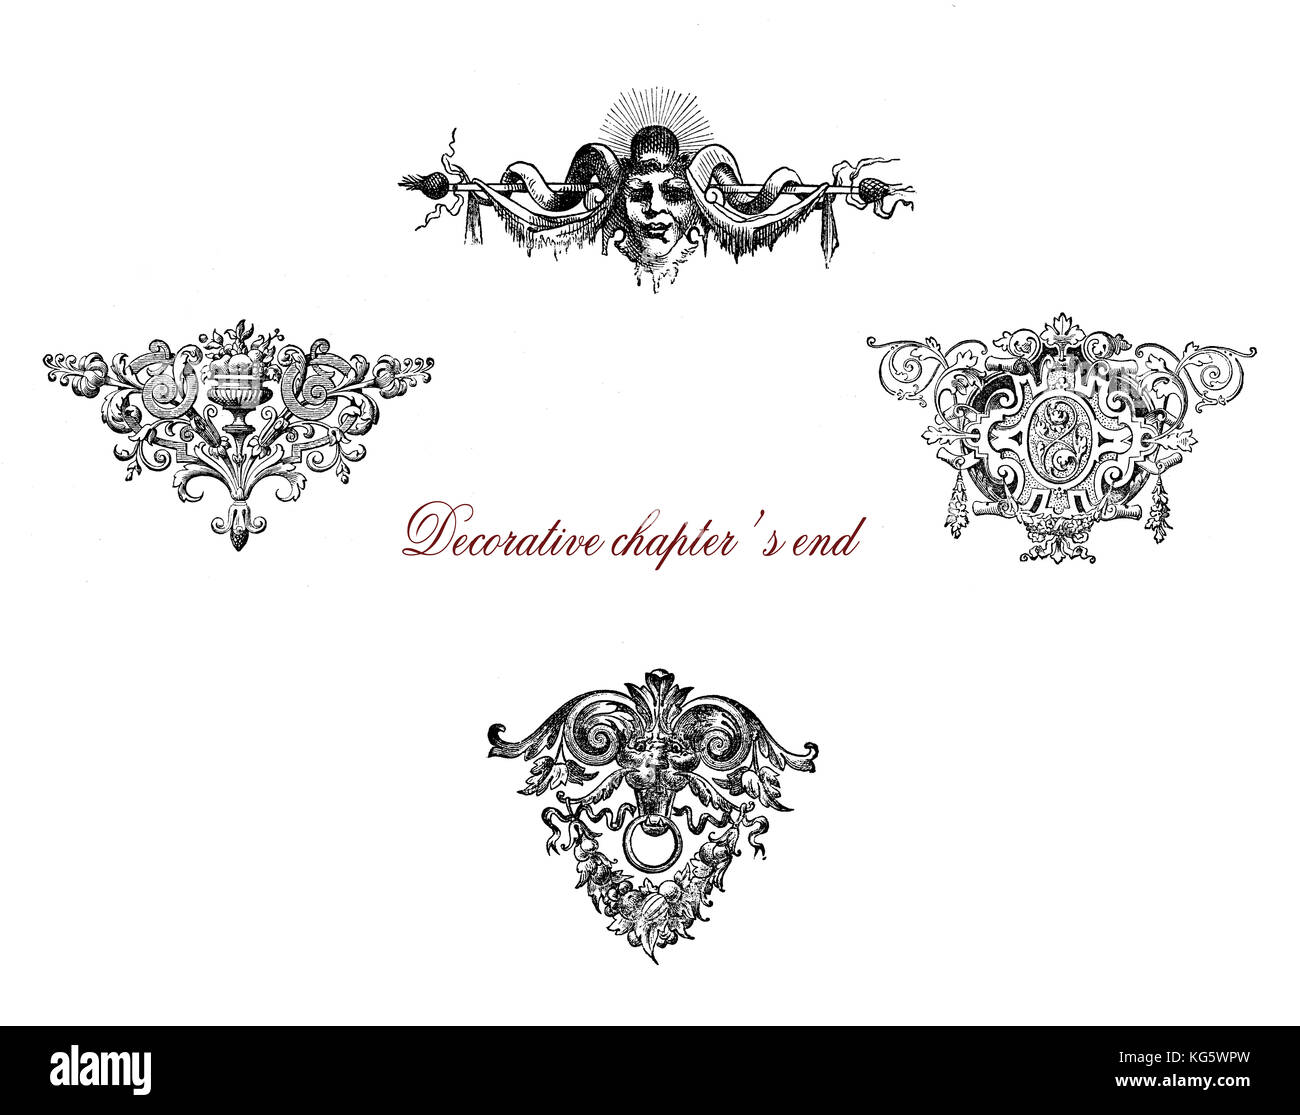 Richly decorated baroque typographic chapter's ends, mythological figure and floreal motives Stock Photo